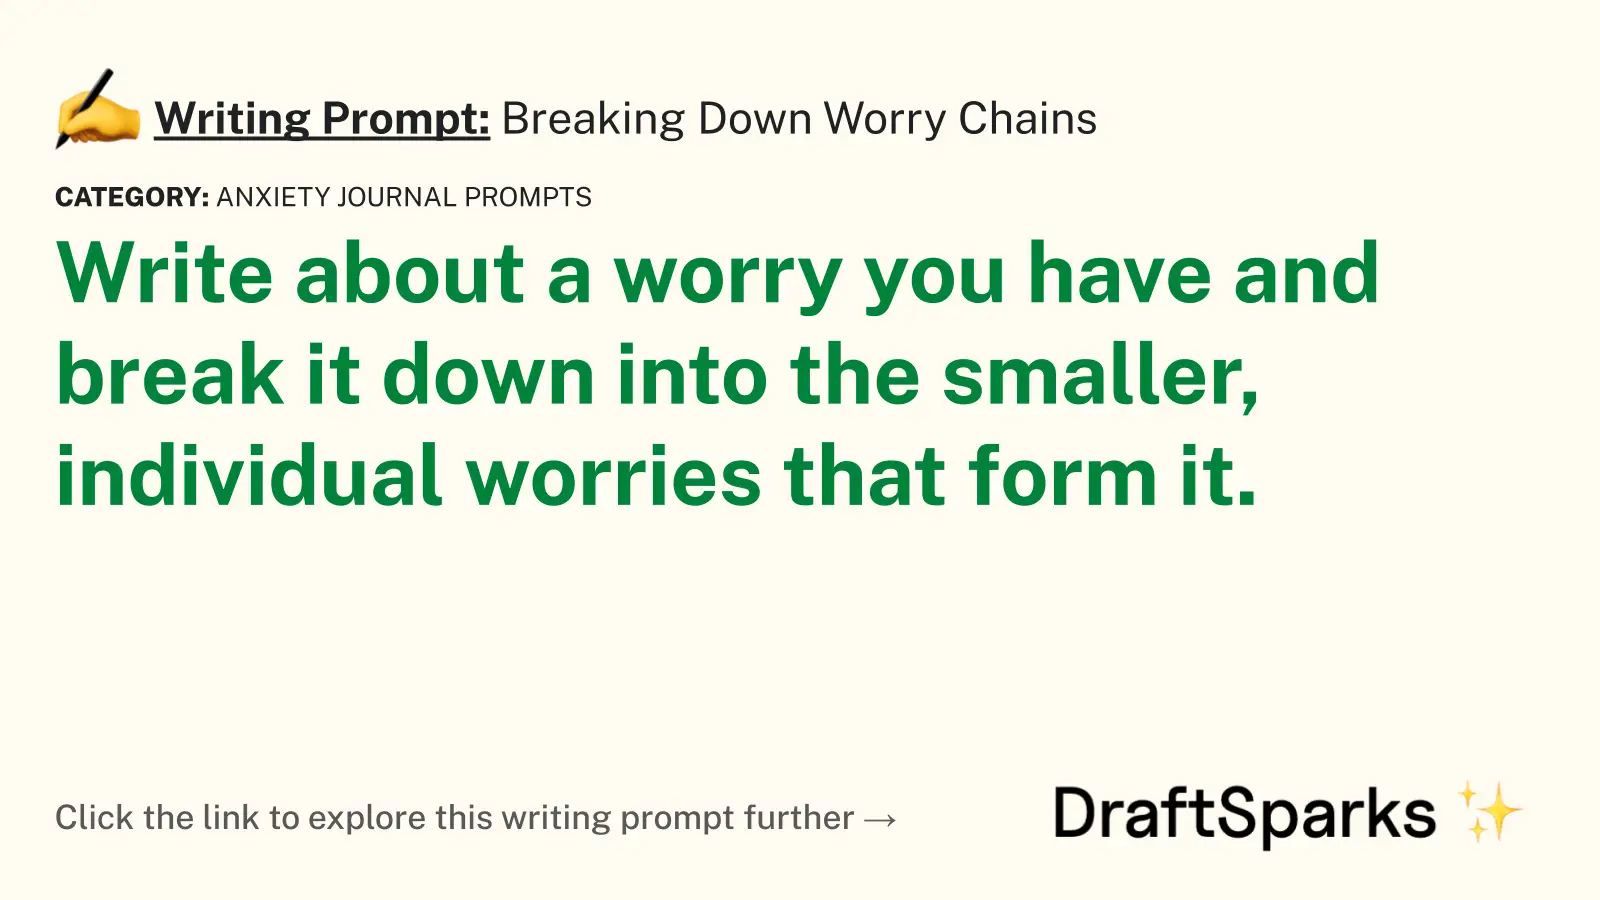 Breaking Down Worry Chains